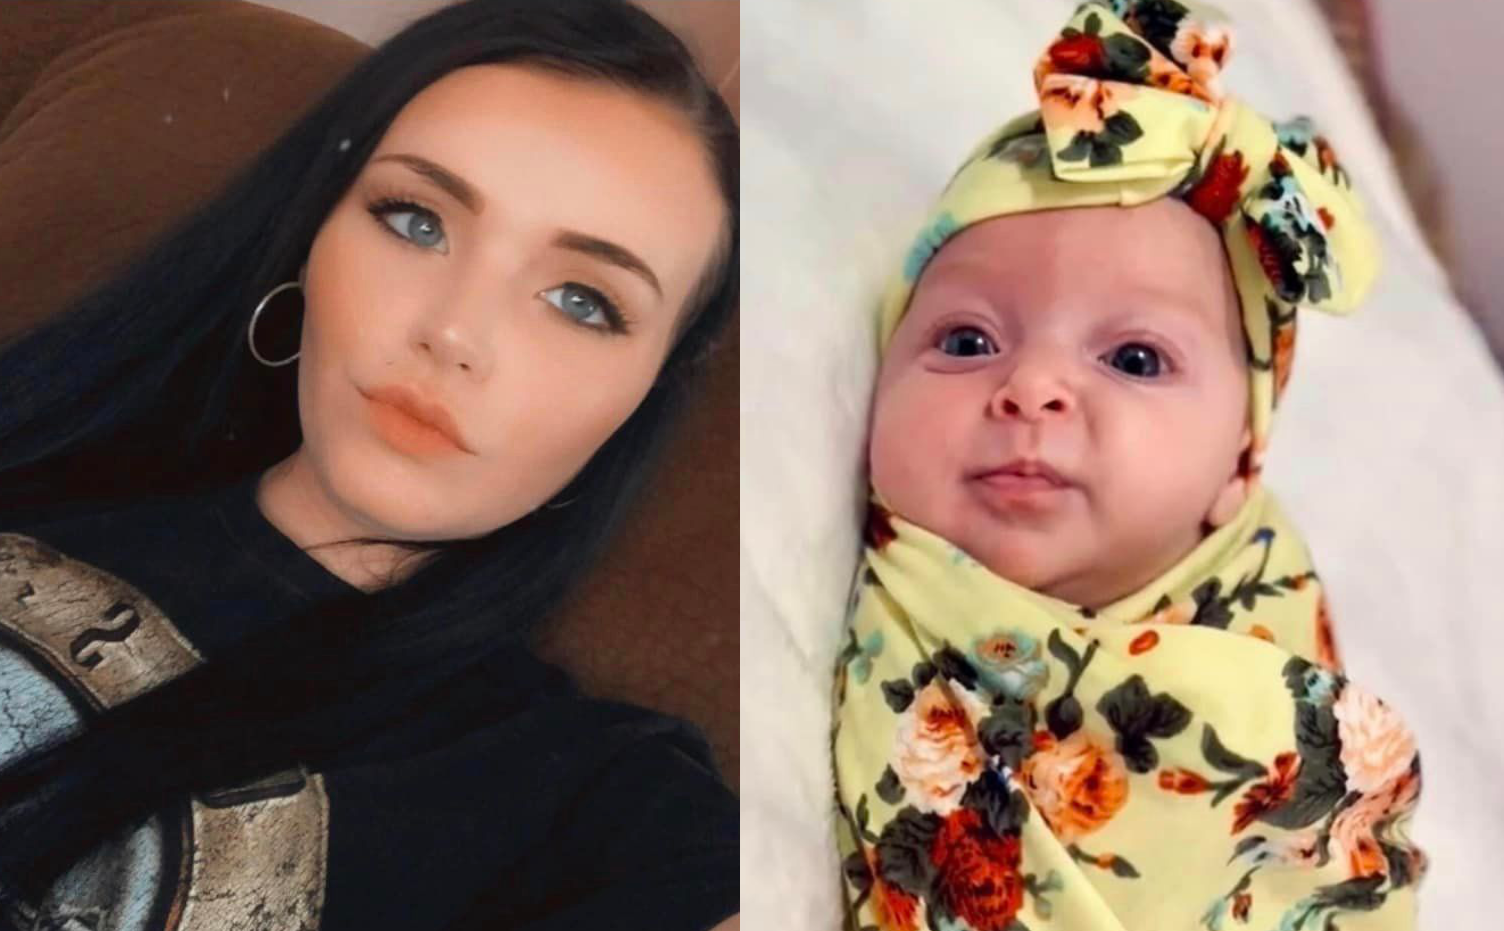 Ashland Police searching for Pike woman and baby